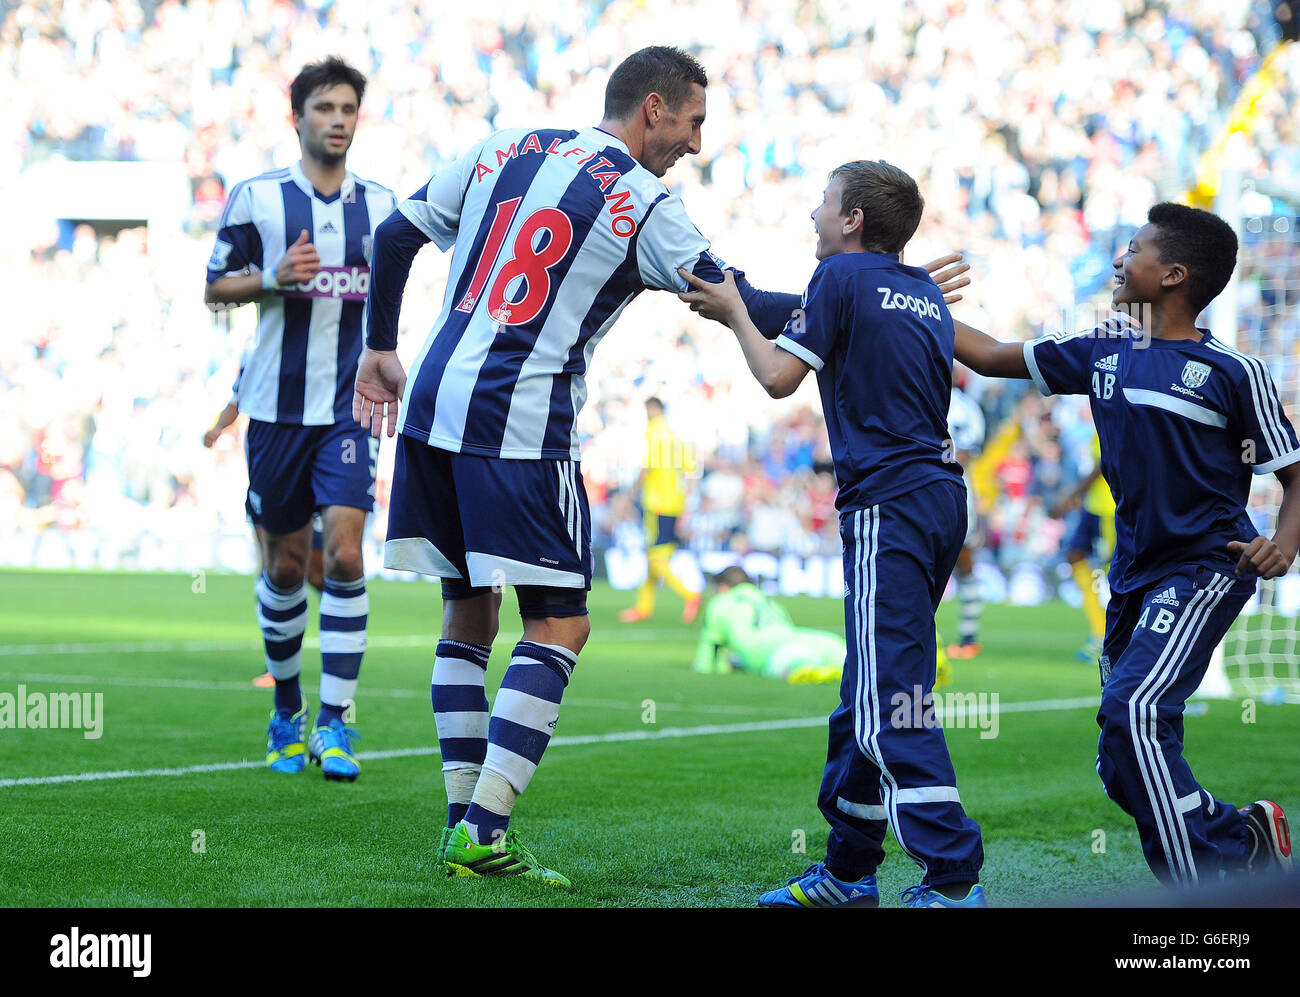 West Bromwich Albion's Morgan Amalfitano celebrates scoring his teams 3rd goal against Sunderland, during the Barclays Premier League match at The Hawthorns, West Bromwich. Stock Photo